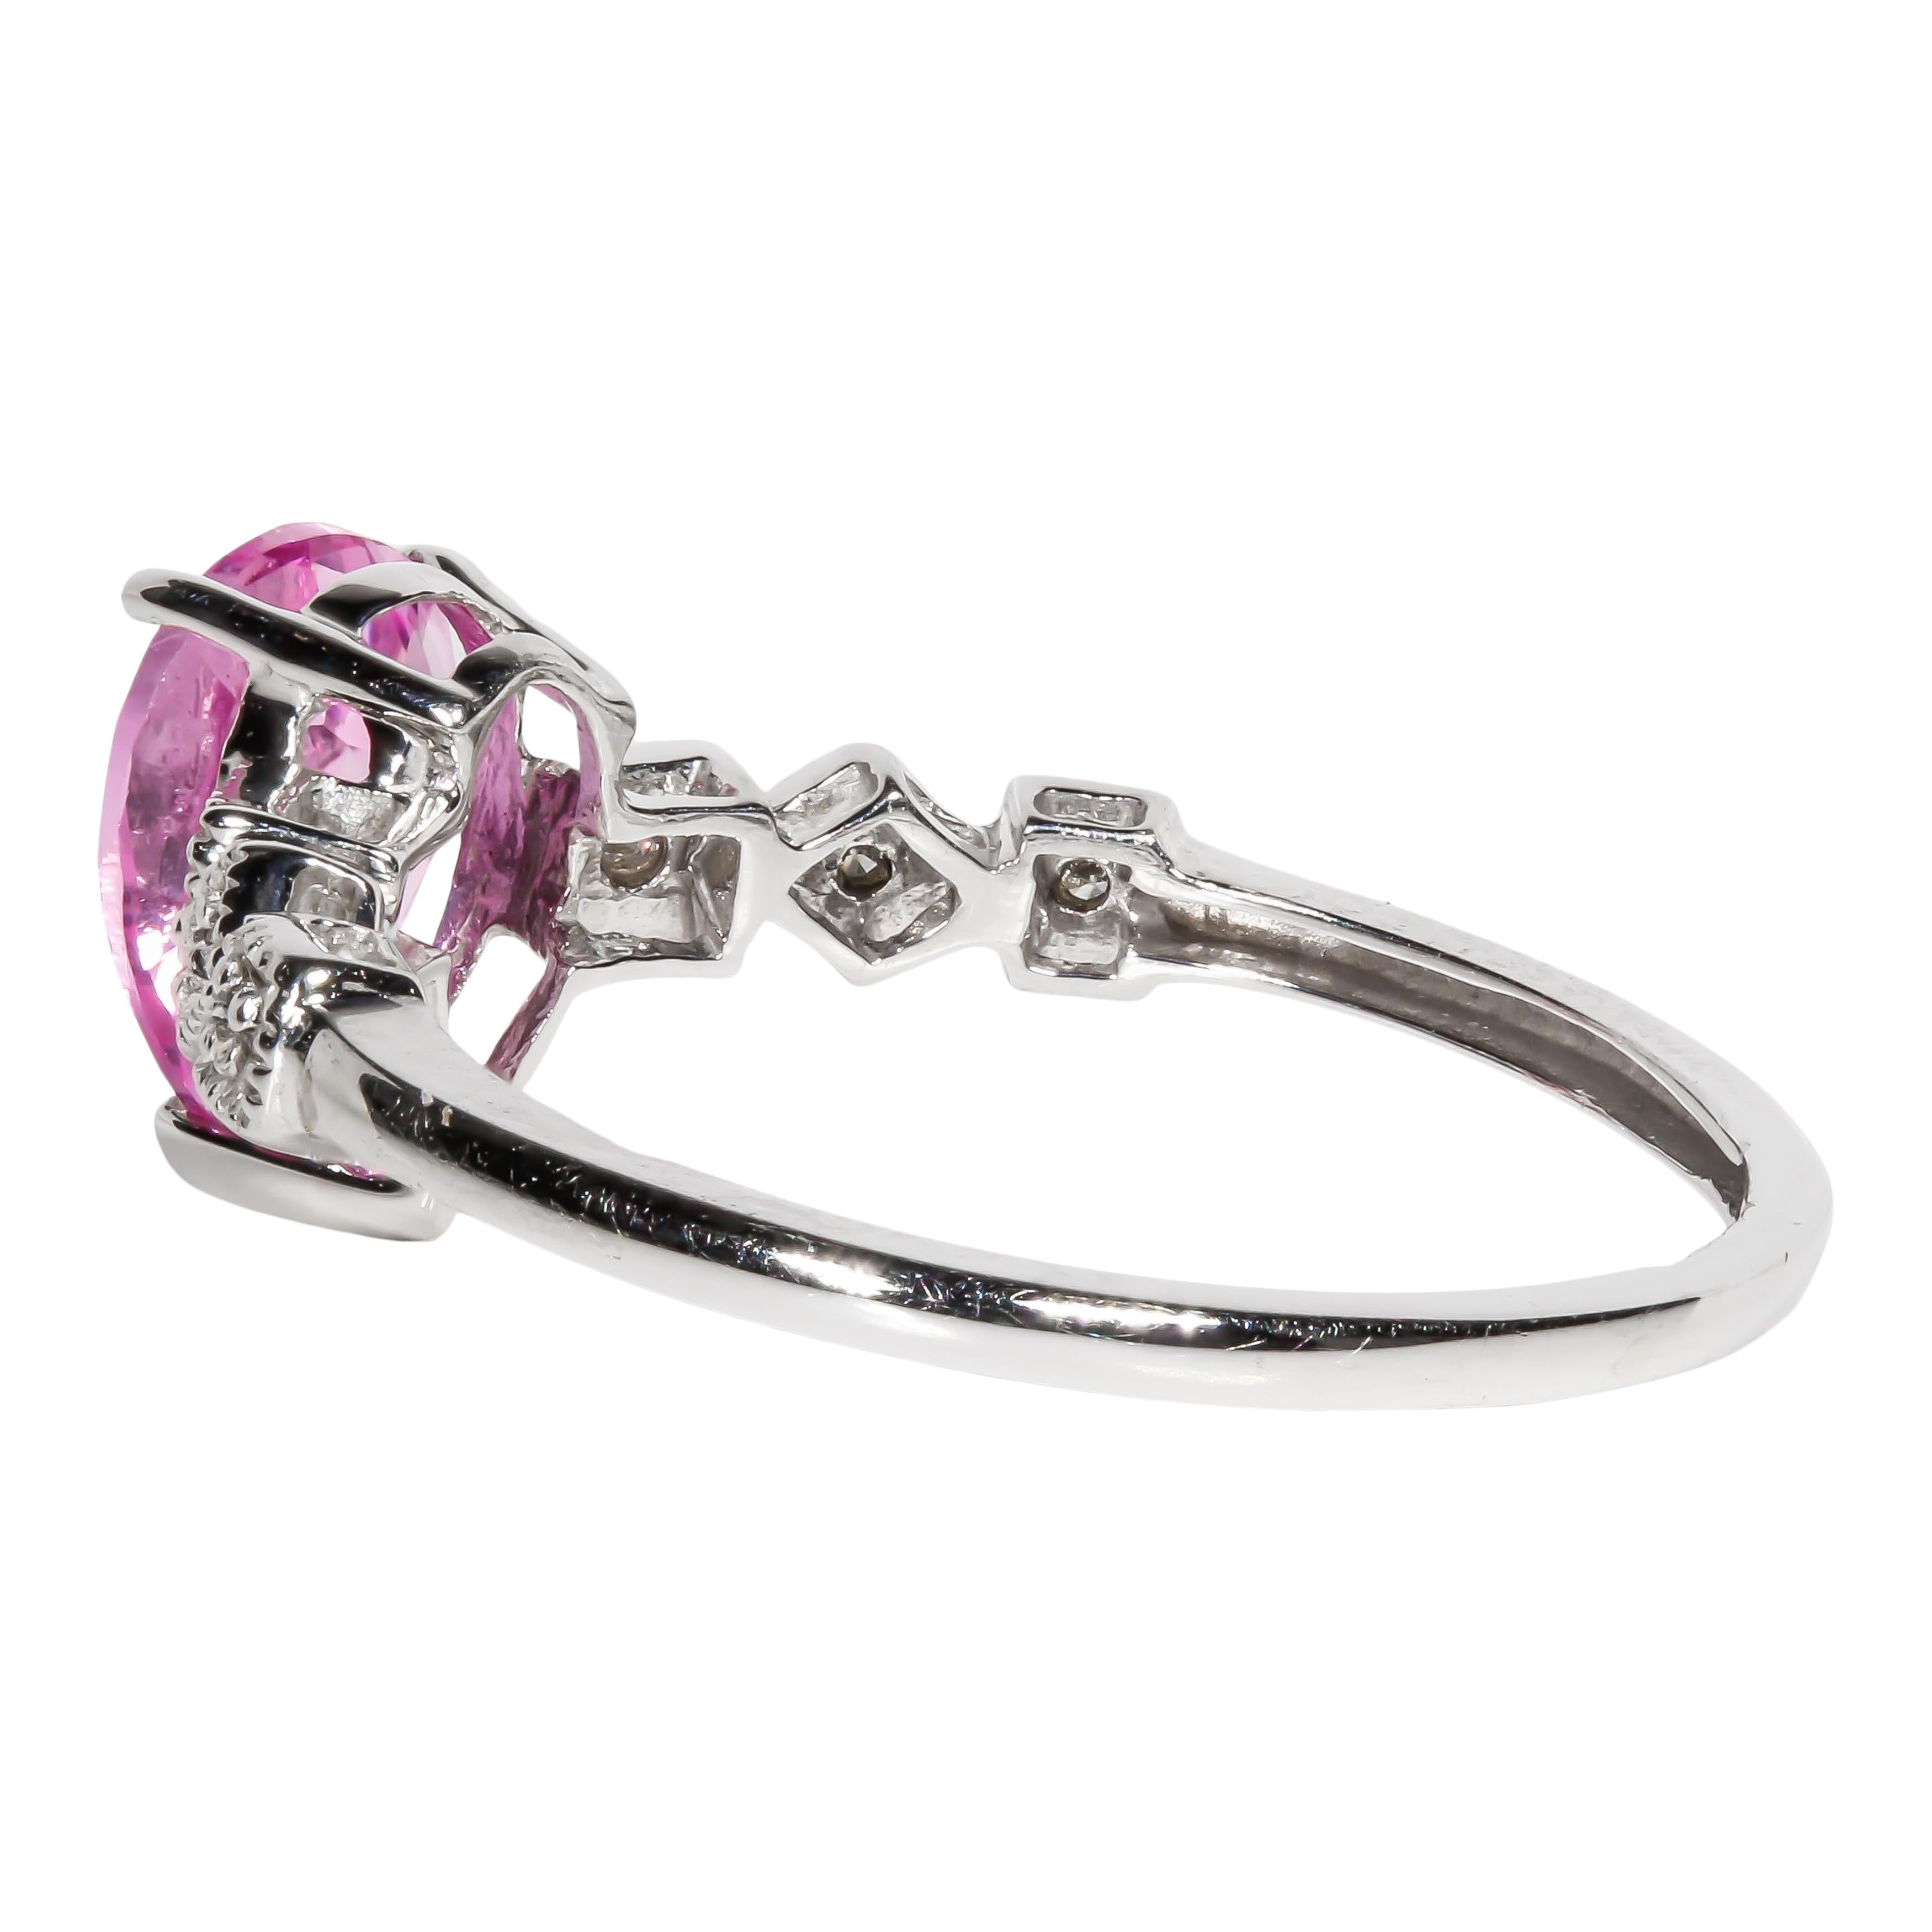 Women's 1.50 Carat Pink Topaz and Diamond Cocktail Ring